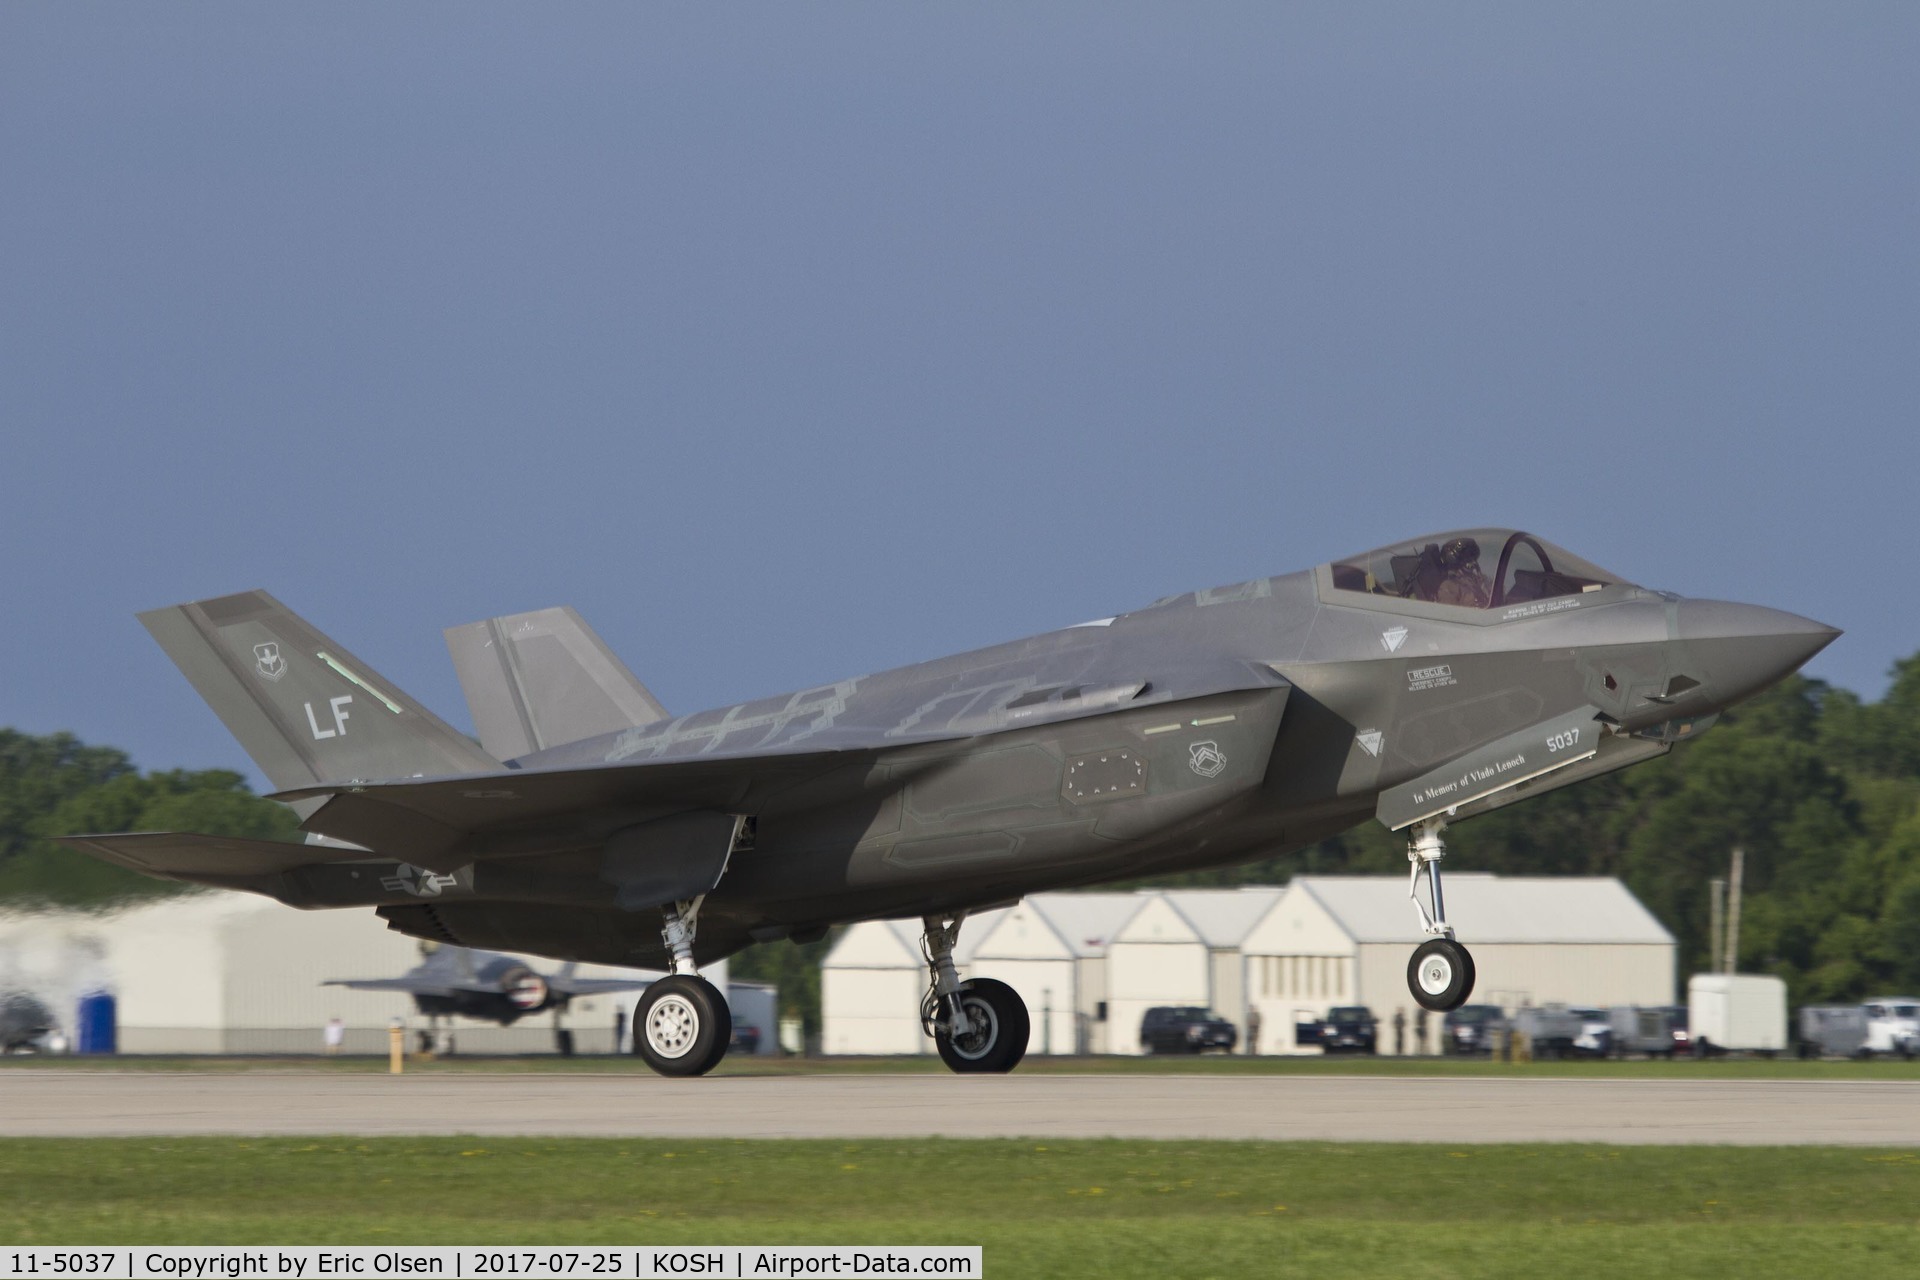 11-5037, 2011 Lockheed Martin F-35A Lightning II C/N AF-48, F-35A Lightning II landing after taking part in a Heritage Flight during the 2017 Oshkosh Airventure.